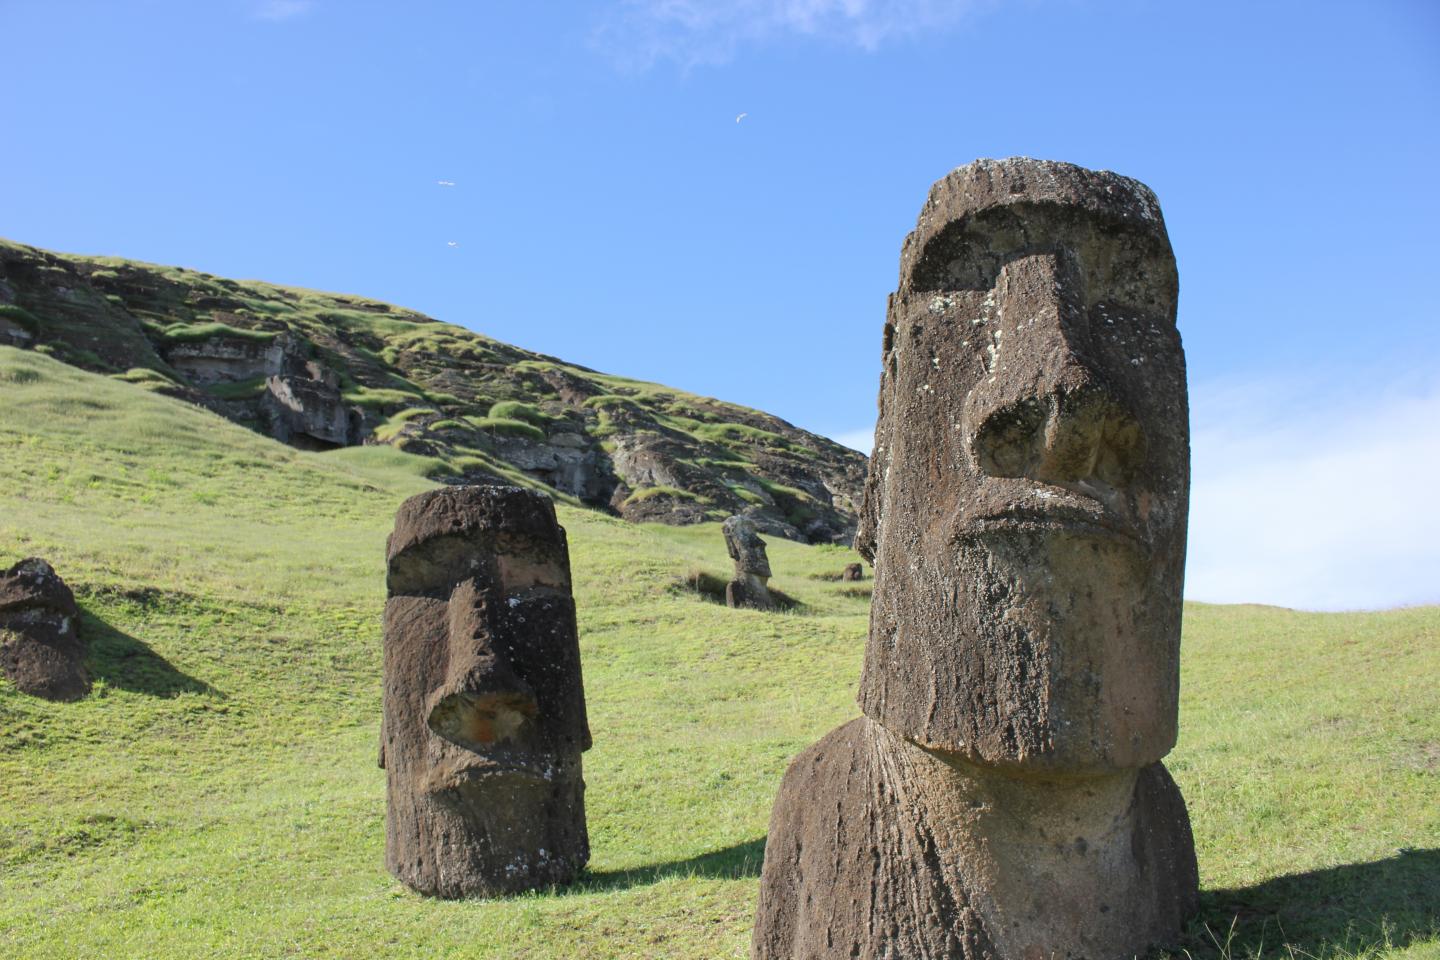 Easter Island Statues (1 of 3)